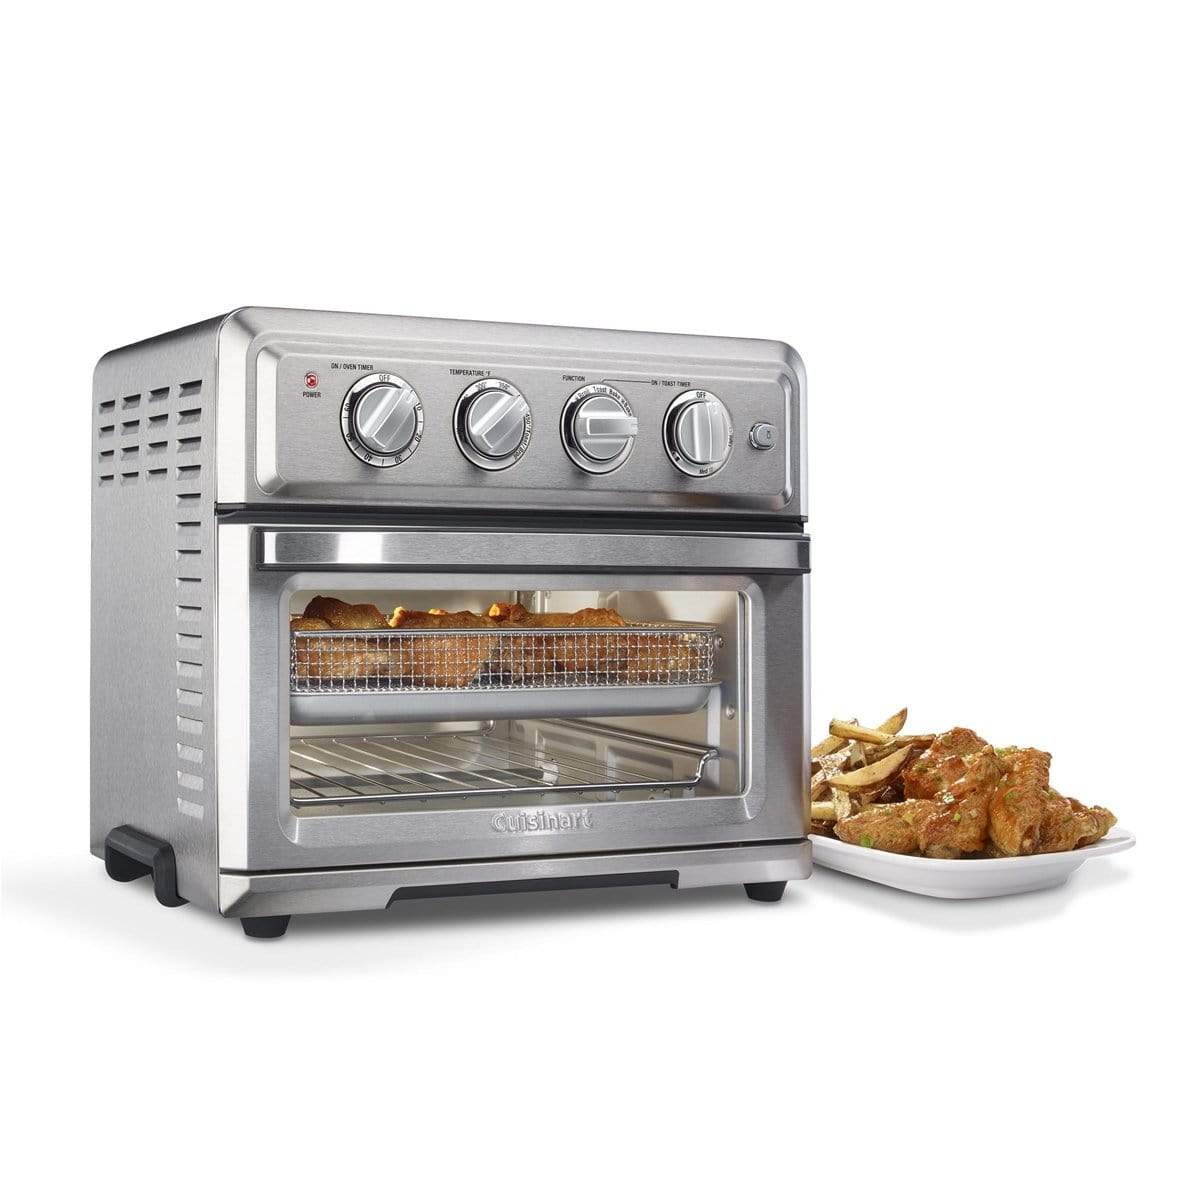 Cuisinart Stainless Steel Oven Air Fryer with Grill Toaster Oven (Black)  with Air Fryer Oven Cookbook and Oven Mitt (3 Items)